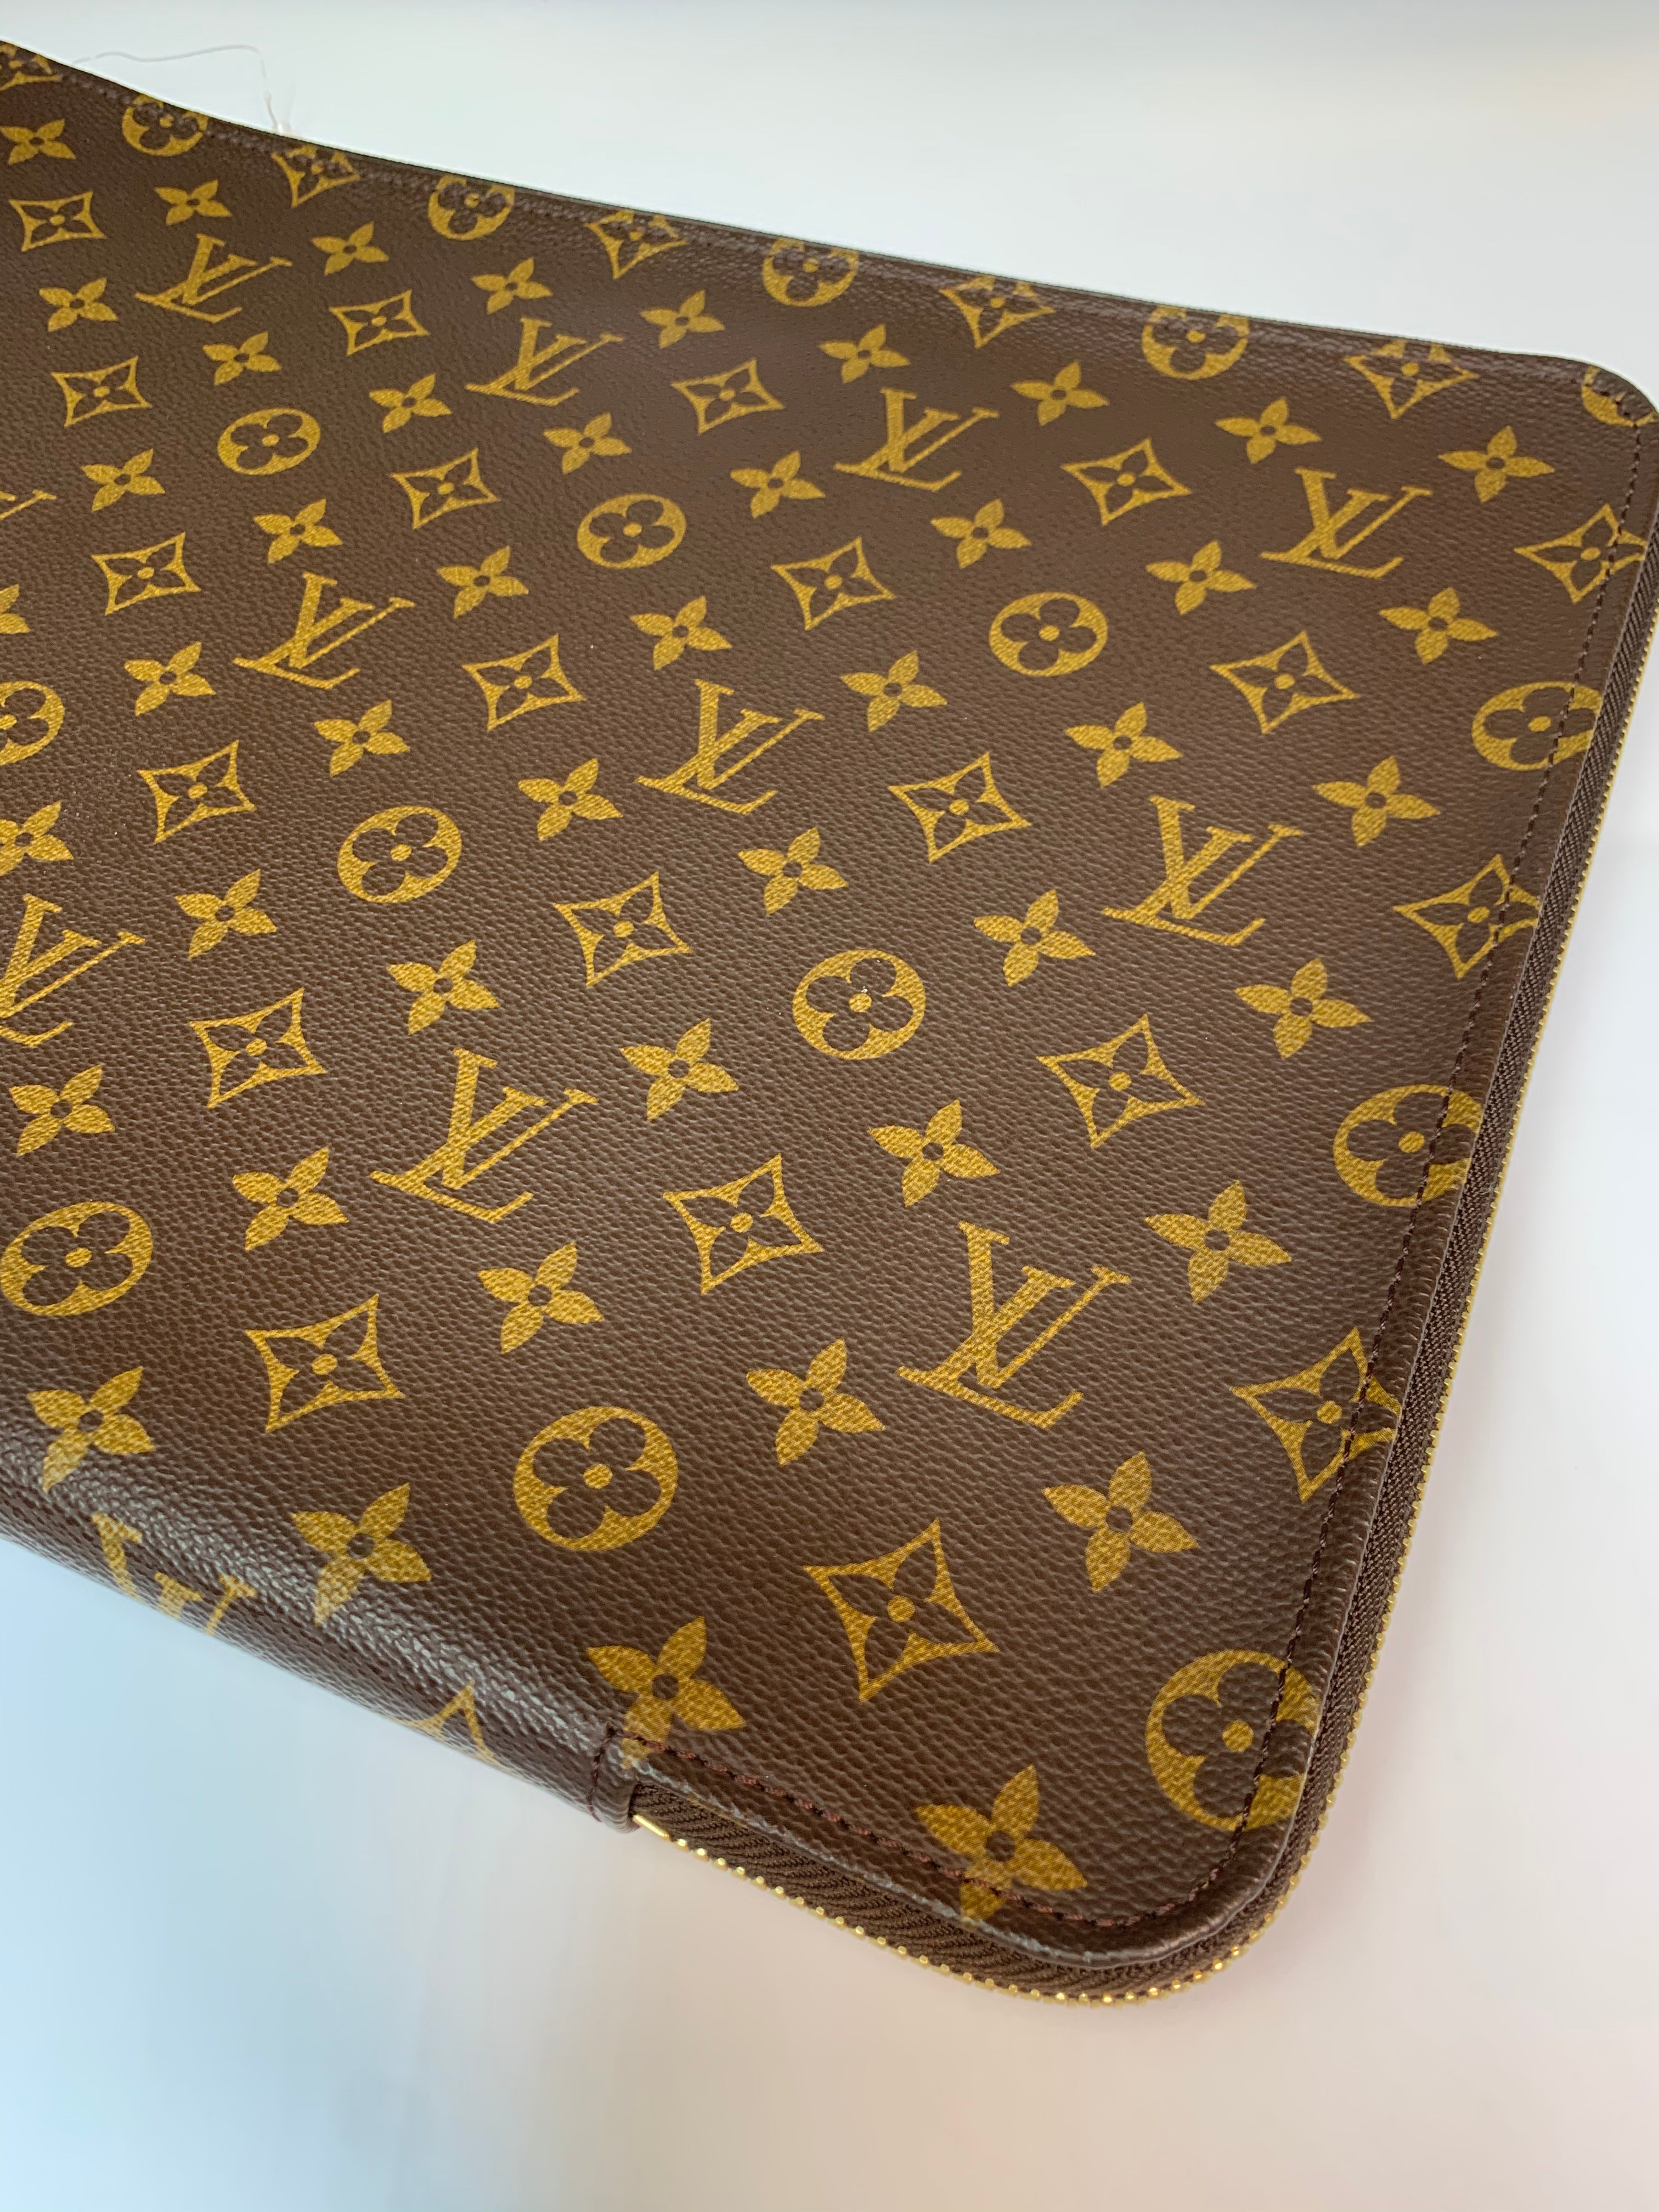 Ordered a 15 Louis Vuitton Laptop Case.received a smaller one